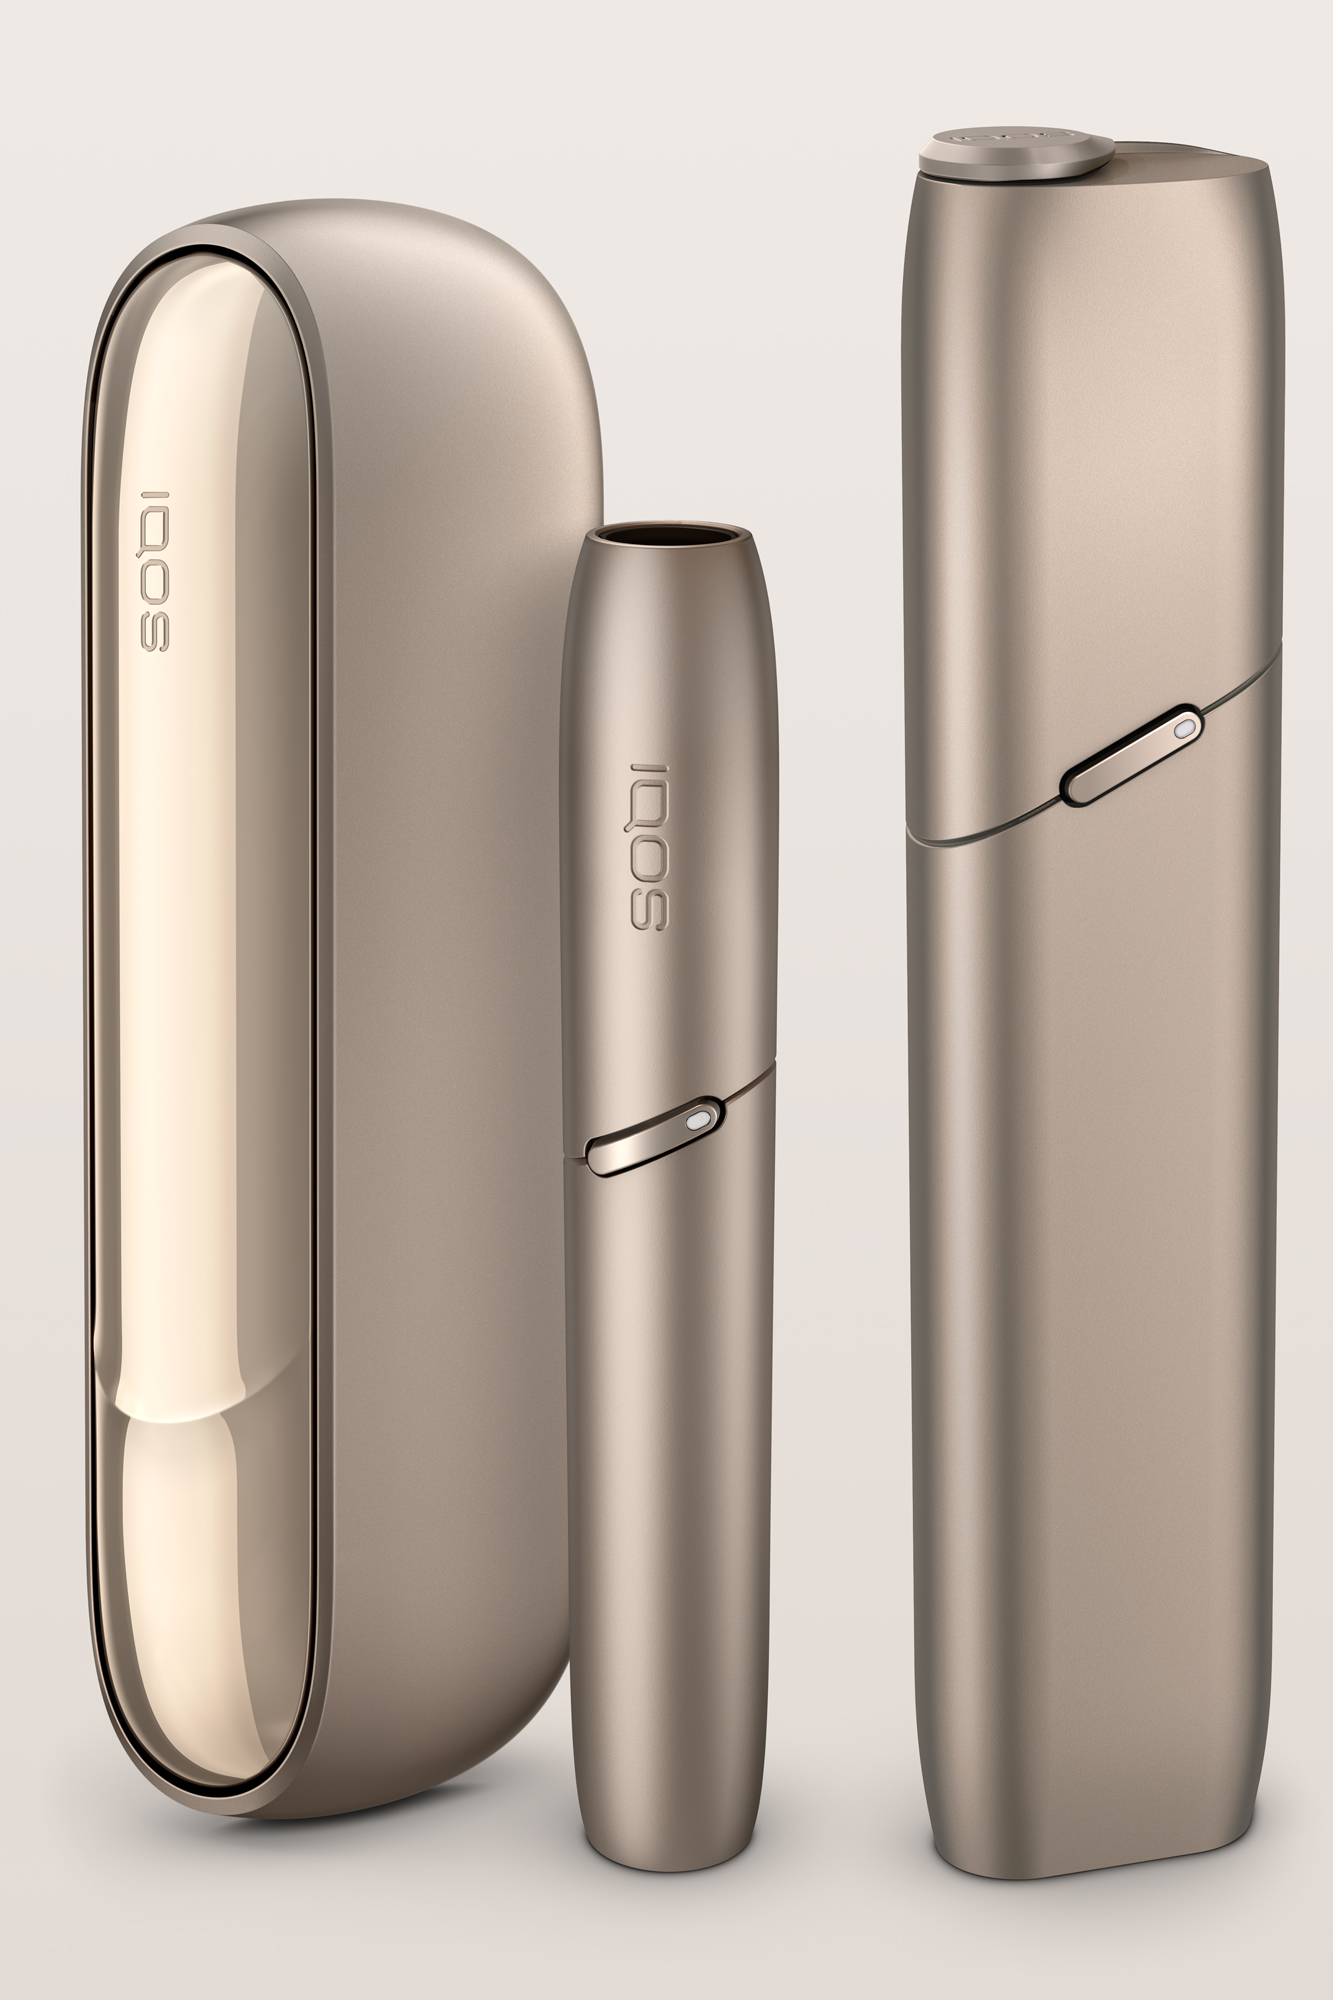 In Japan, the new IQOS 3 and IQOS 3 MULTI have been launched